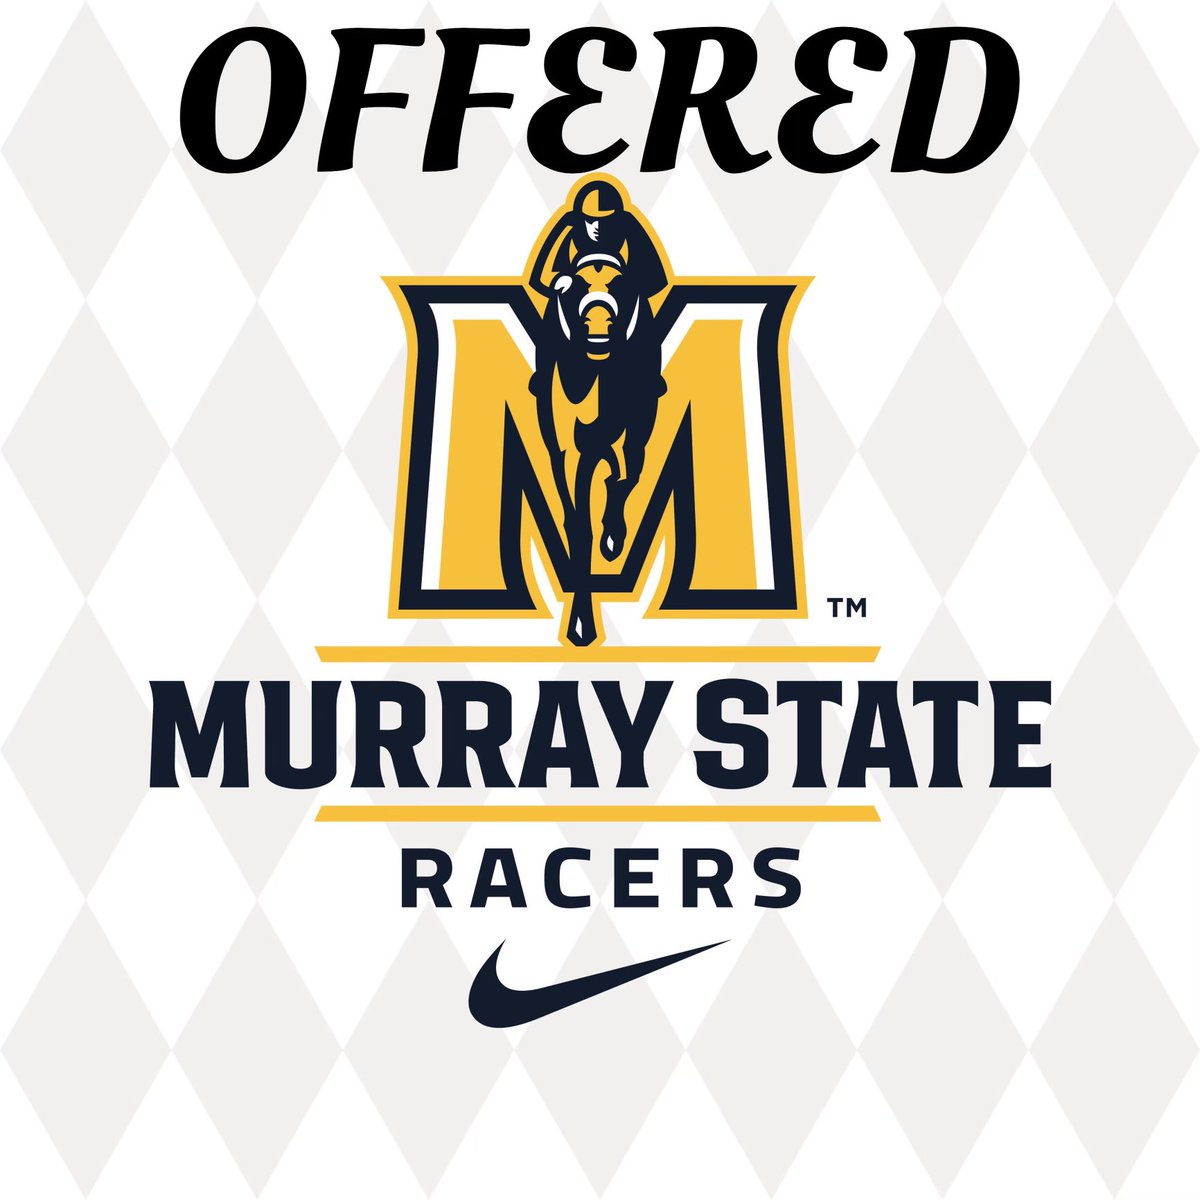 After a great conversation with @WrightJody, I am blessed to receive my first D1 offer from Murray State! Go Racers @racersfootball